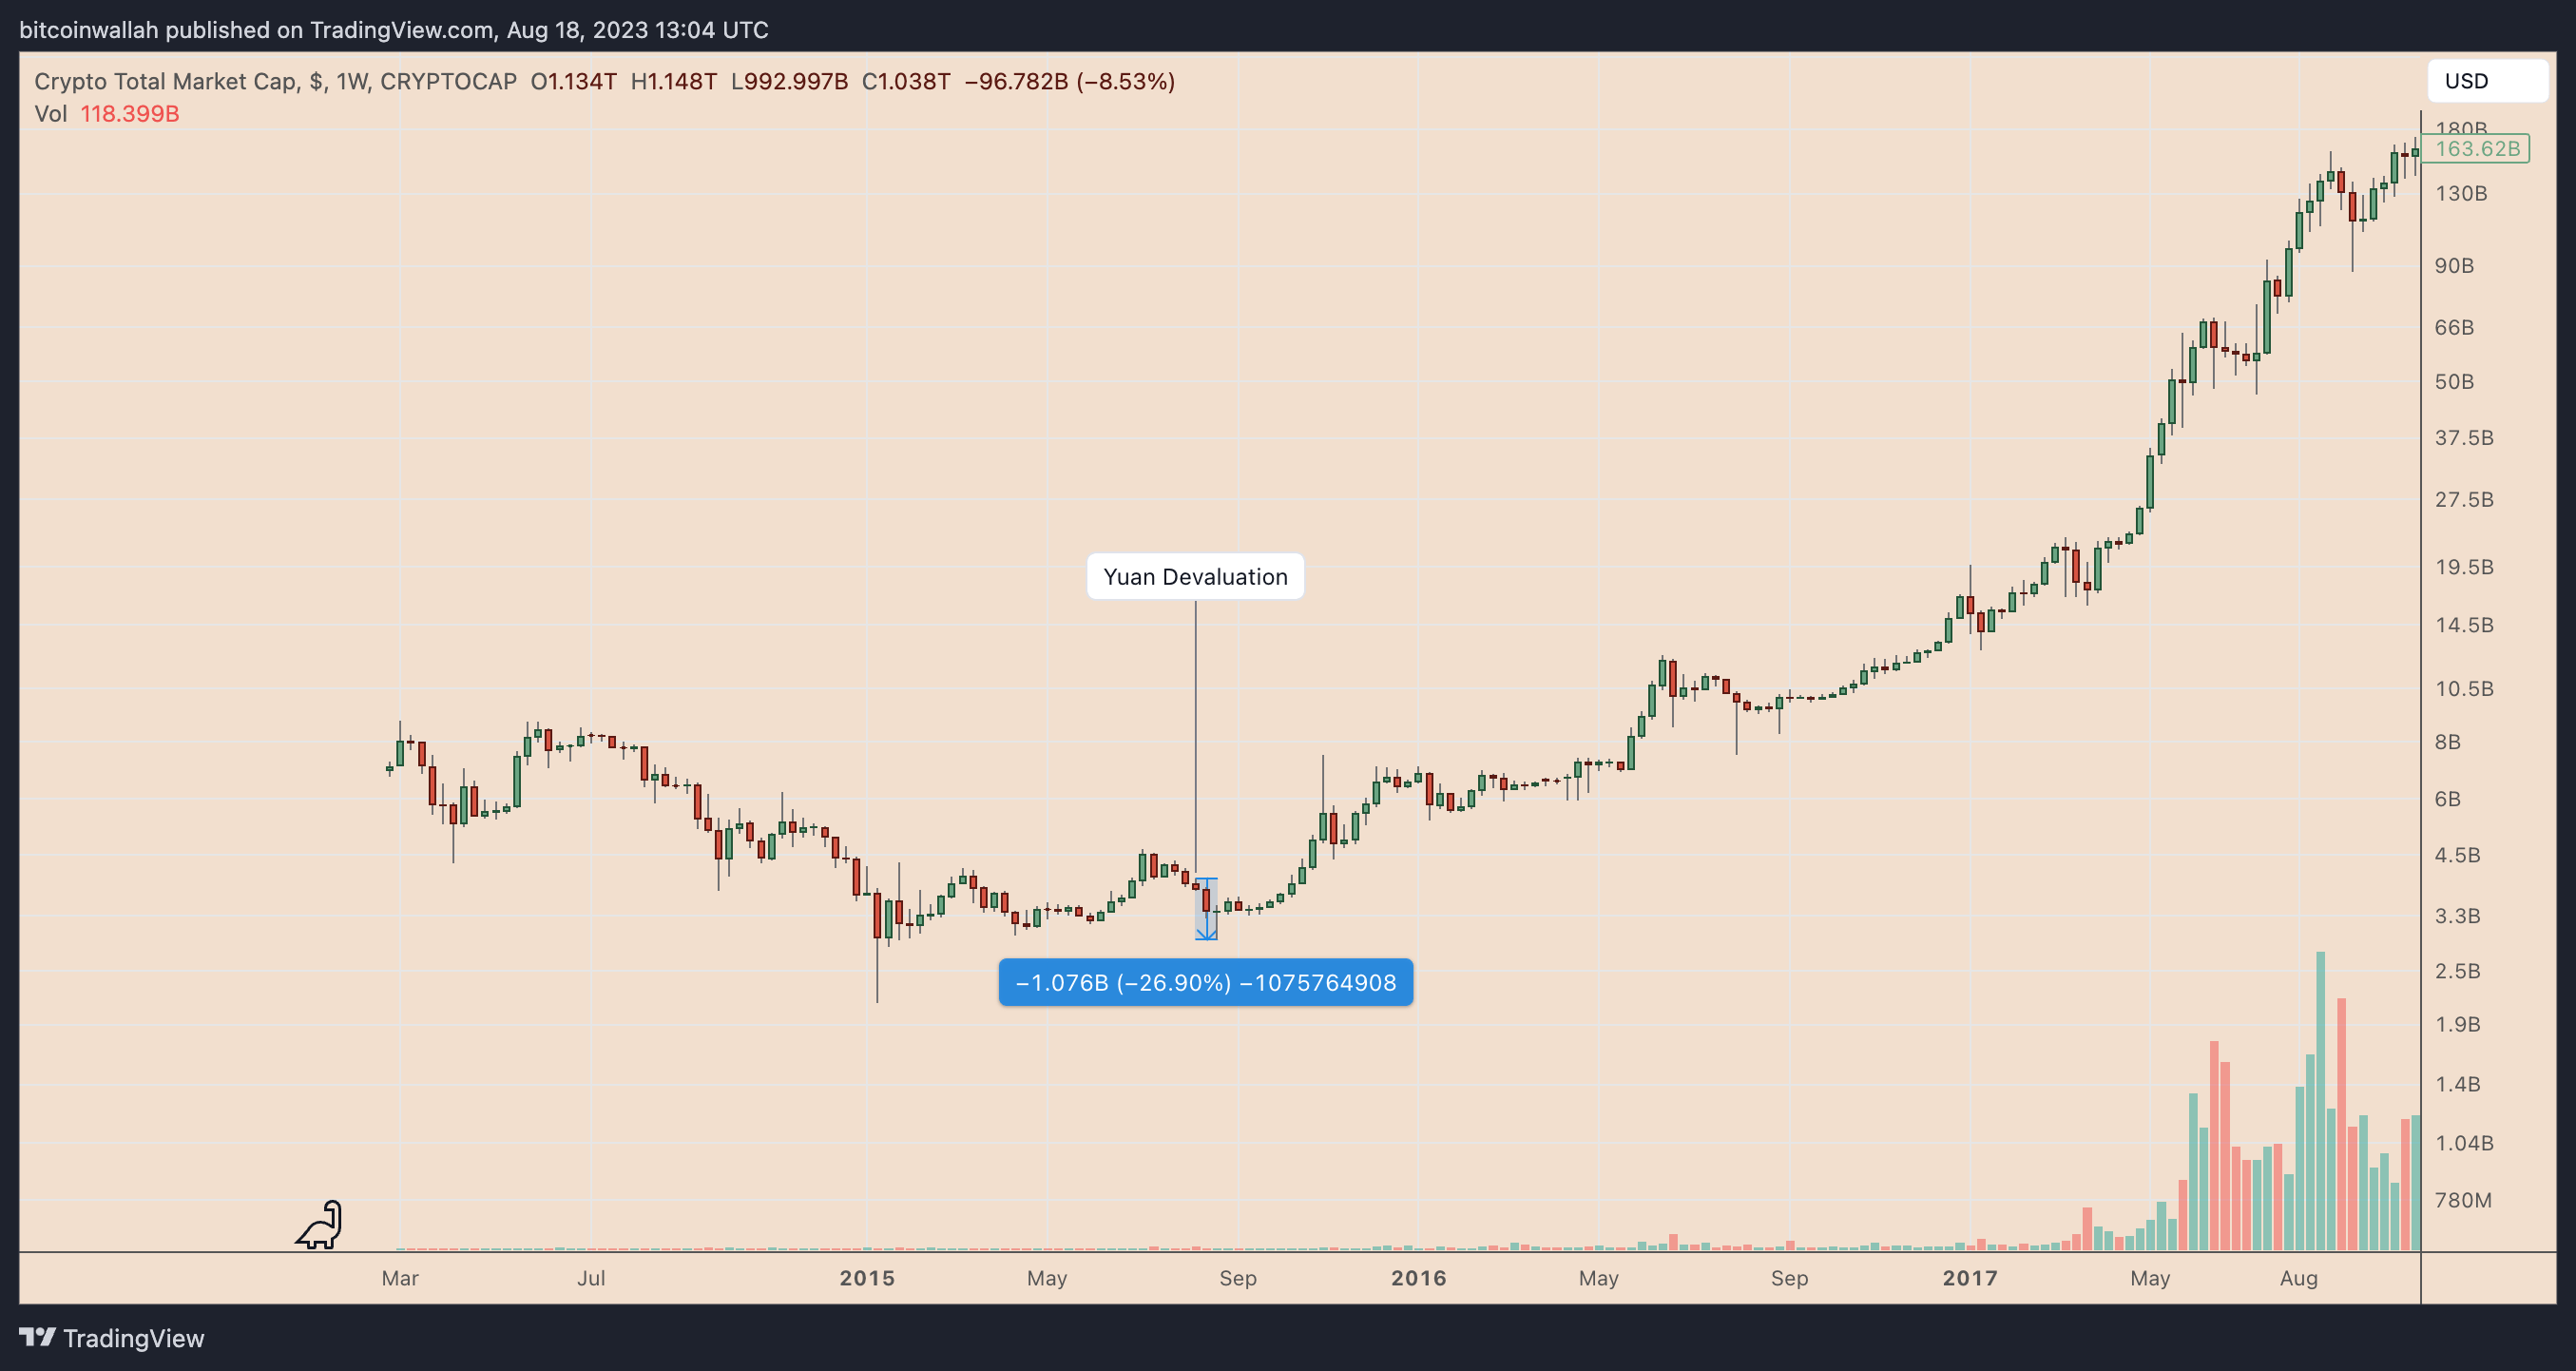 Daily performance chart of the cryptocurrency market. Data source: TradingView.